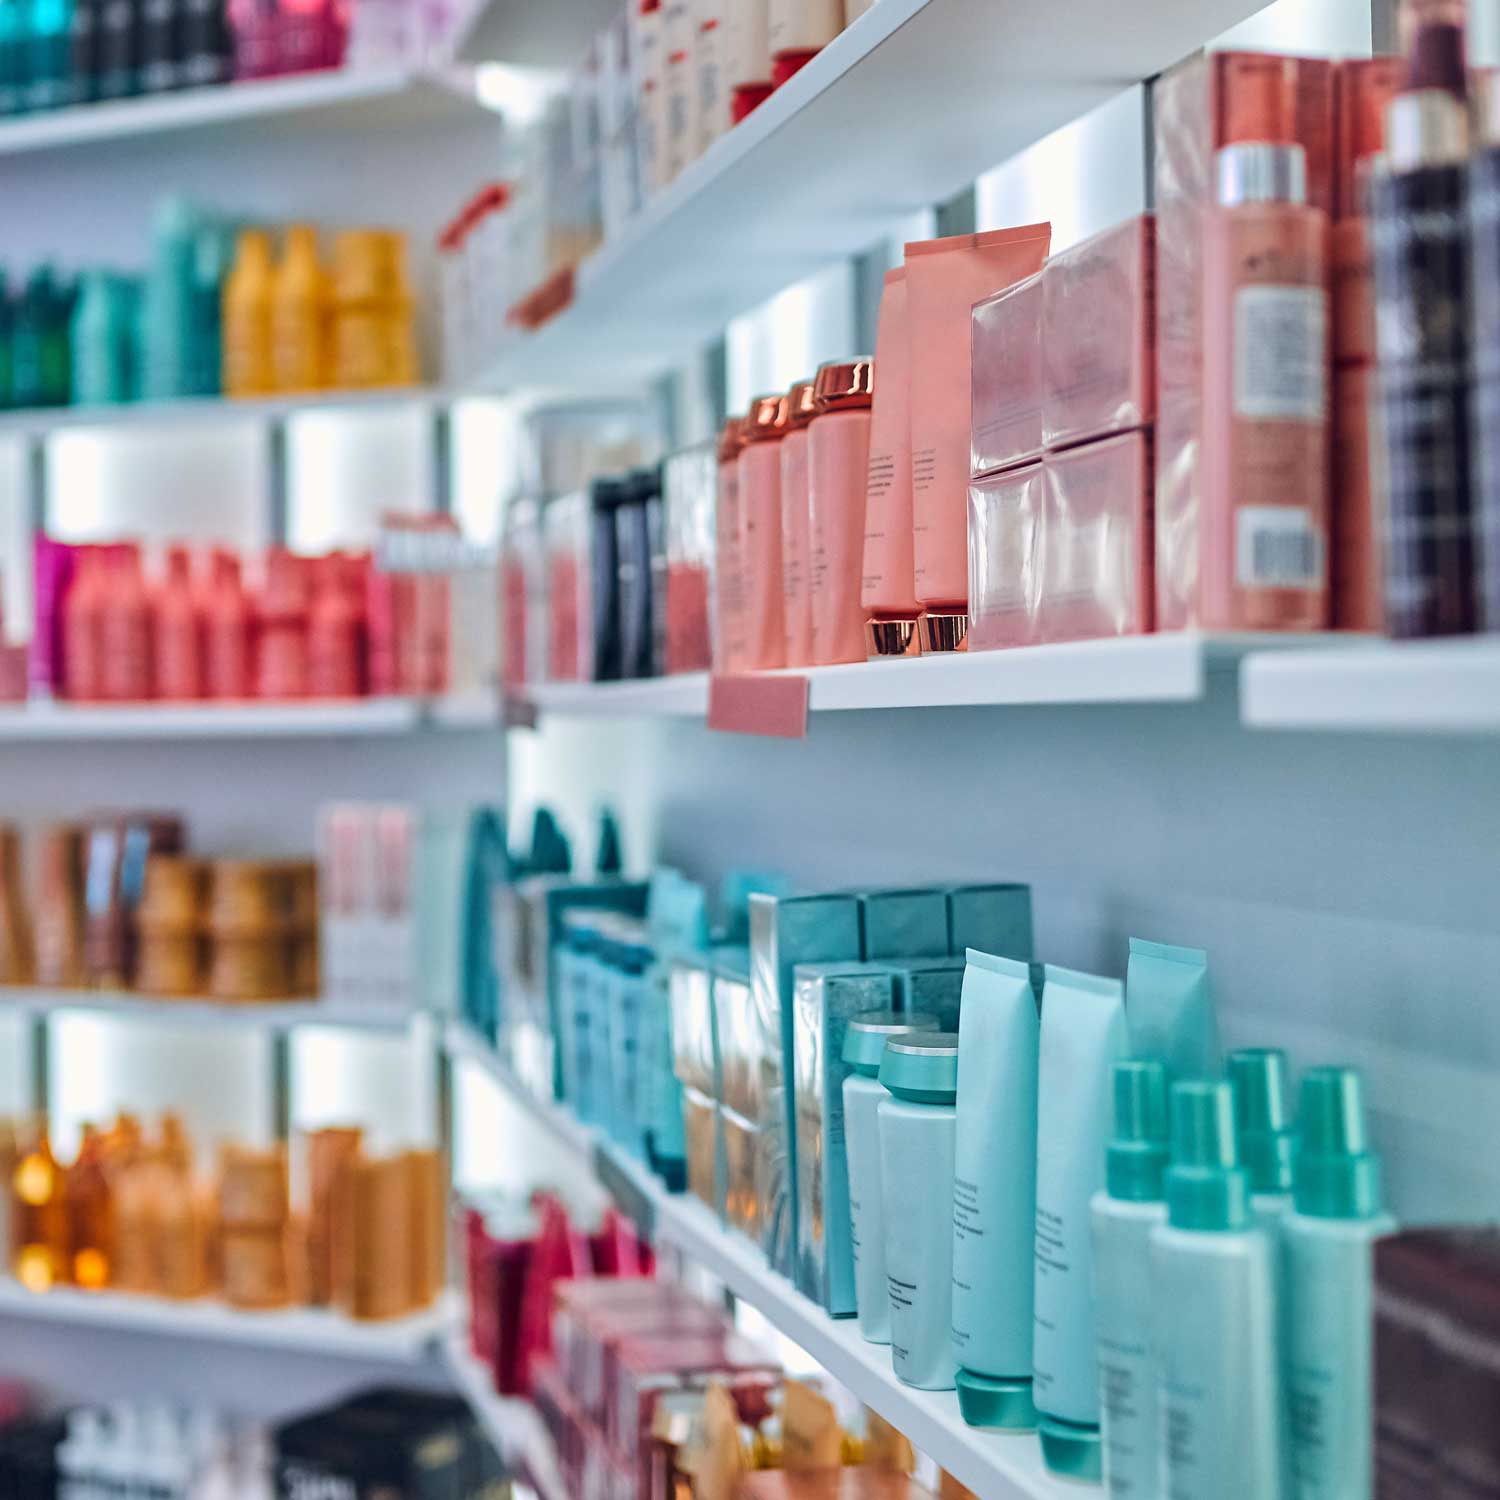 BREAKING NEWS: FDA Issues Draft Guidance on Cosmetic Facility Registration and Product Listing